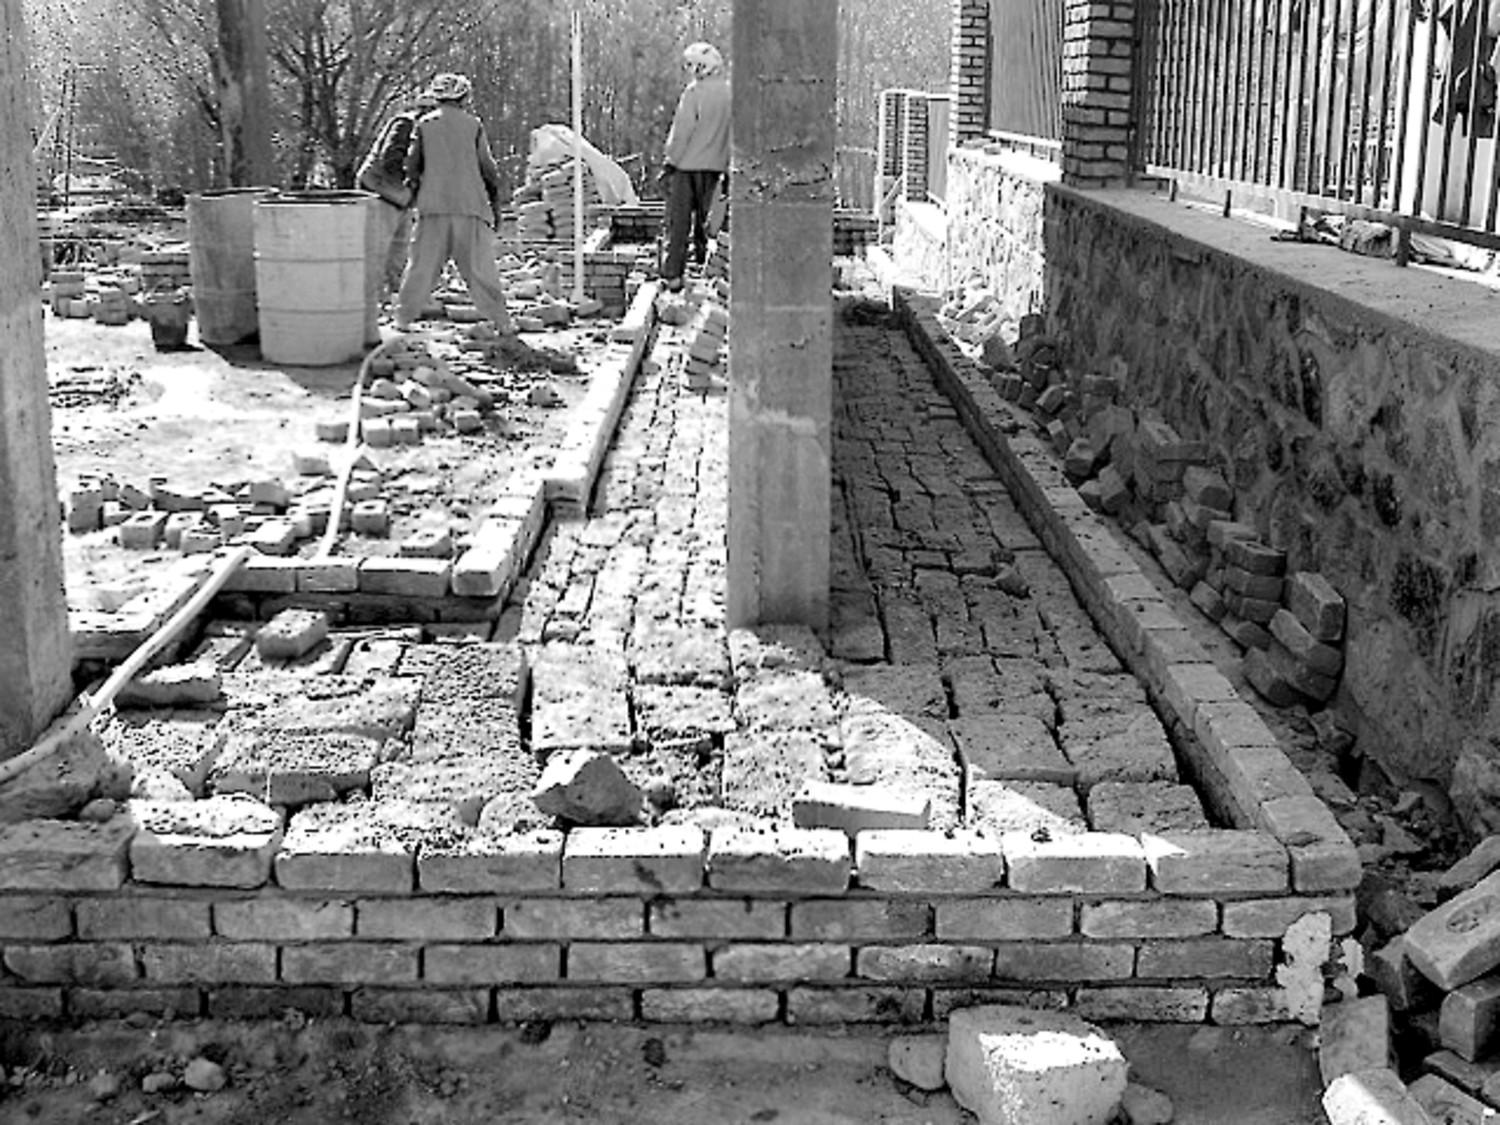 Construction: Resilient brick wall, homogenous structural combination of fired bricks (surface), shock-absorbing cob bricks (core), partially placed concrete fillings